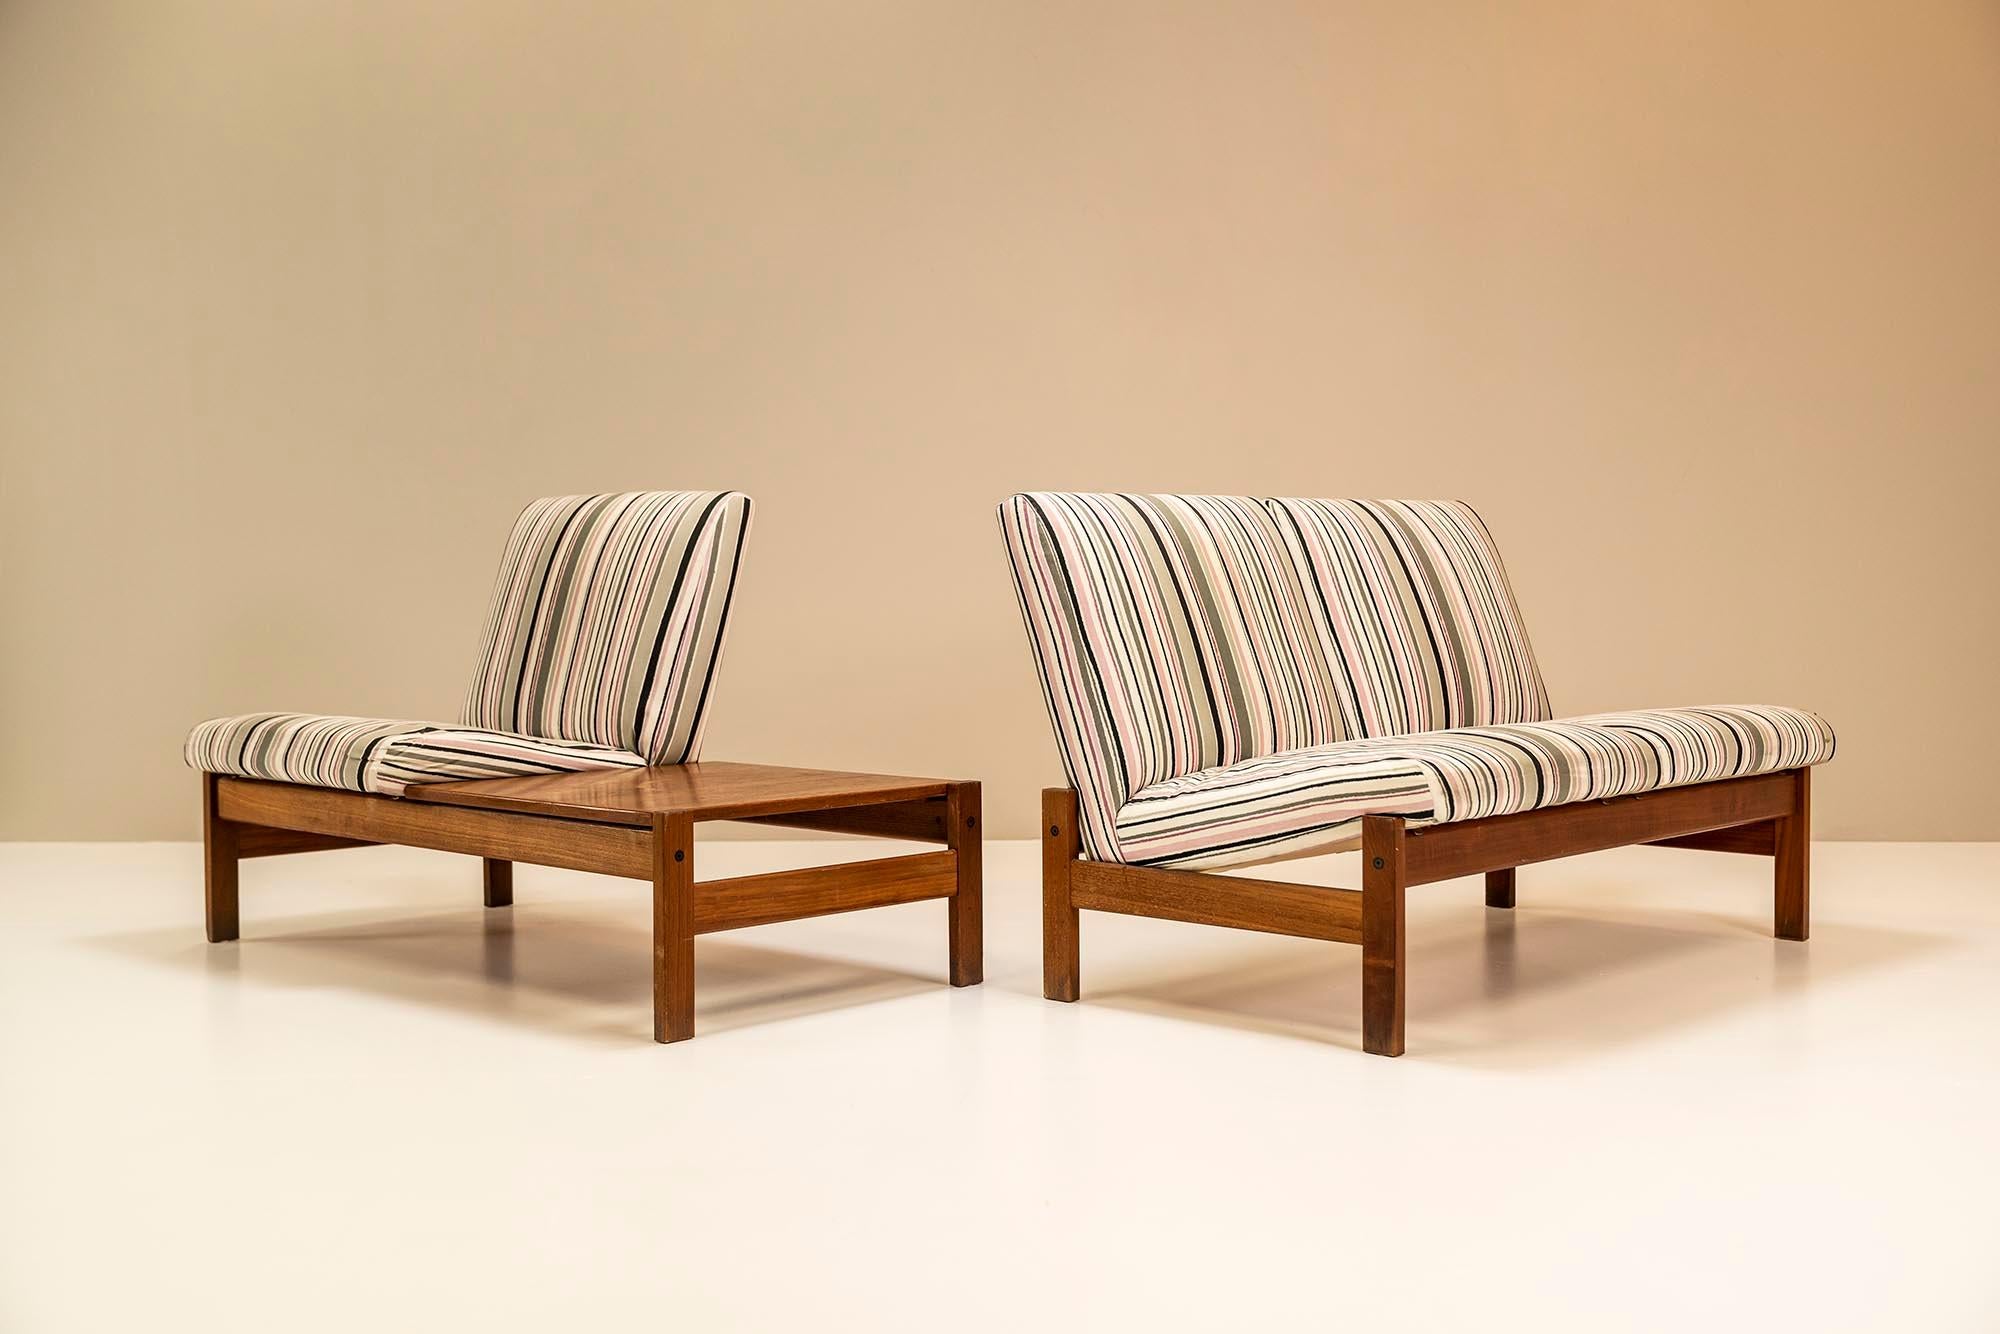 Italian Modular Bench Set in Teak and Original Upholstery, Italy, 1960s For Sale